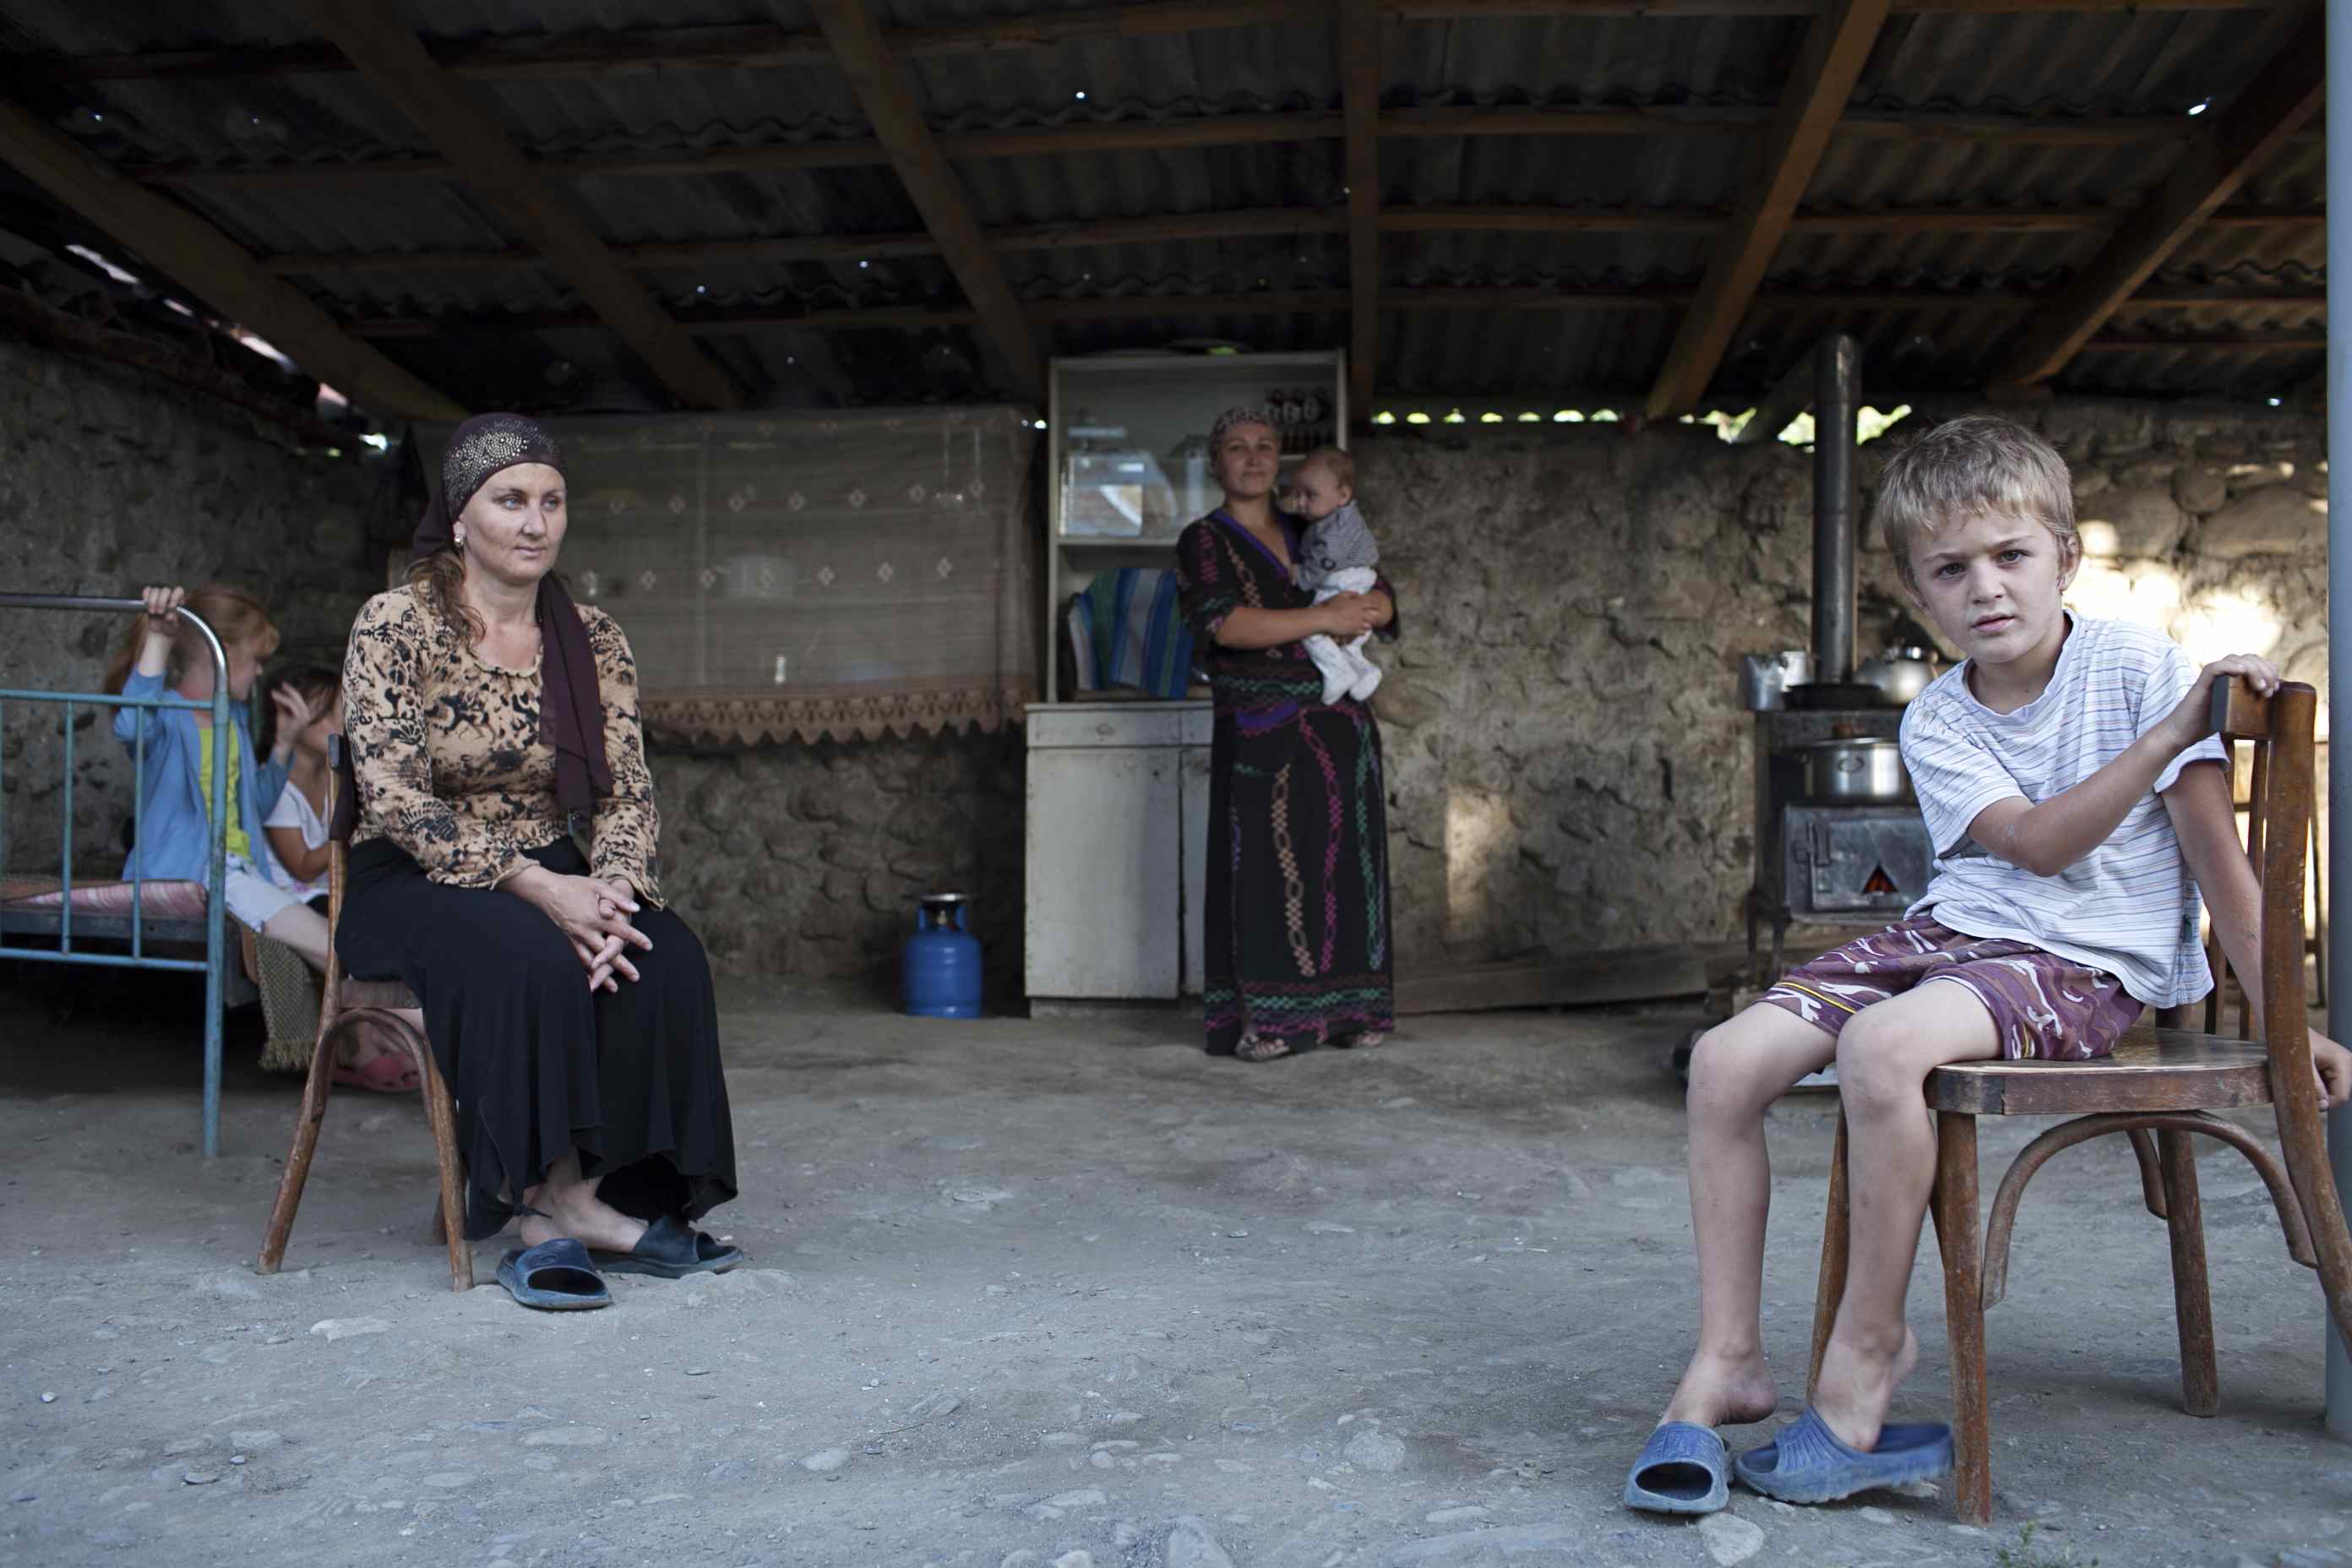 A family in Duisi, Pankisi, considering moving to Grozny in Chechnya for work